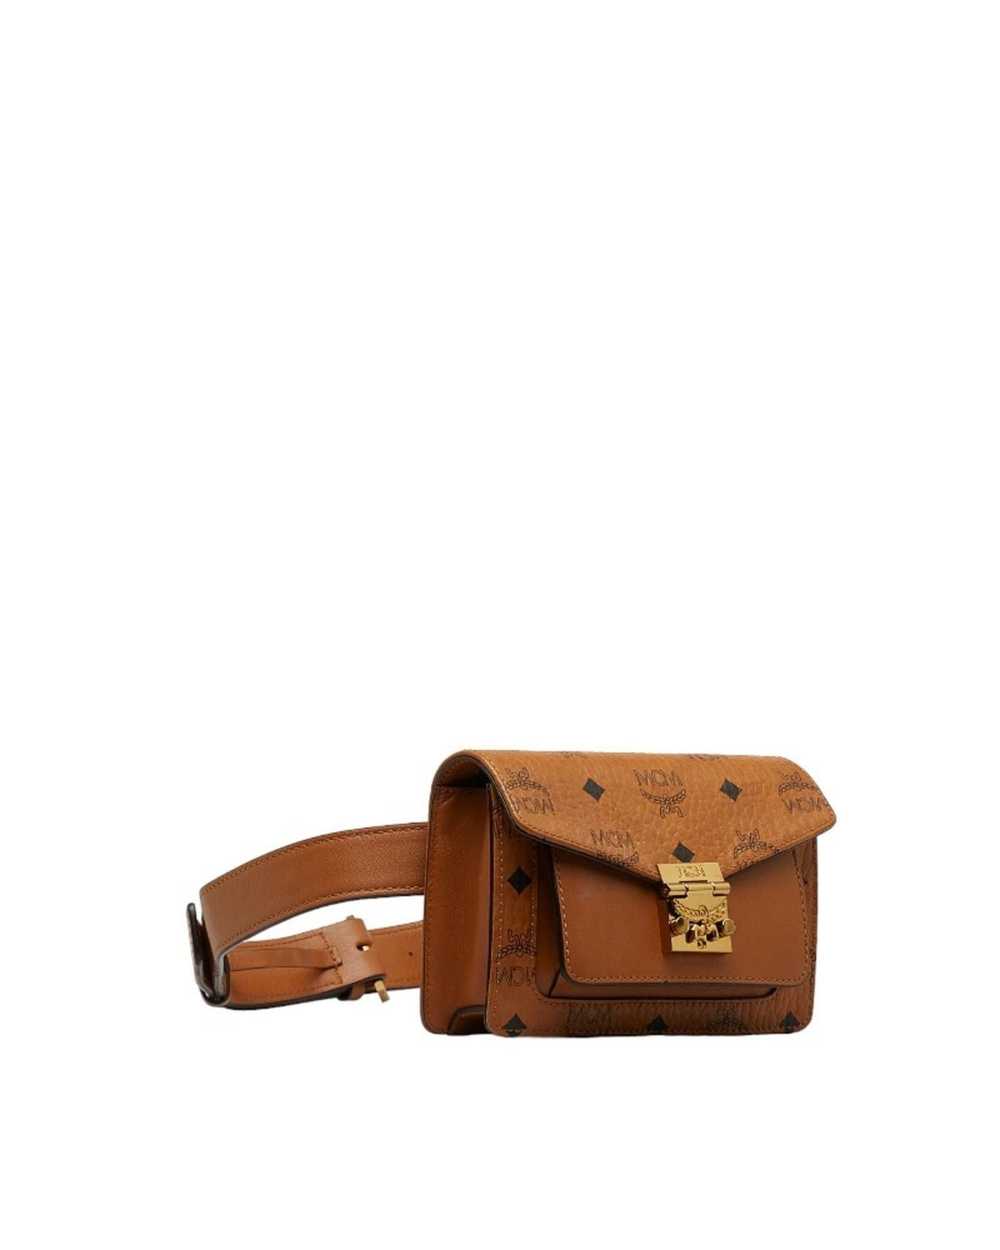 MCM Brown Leather Fanny Pack - image 2